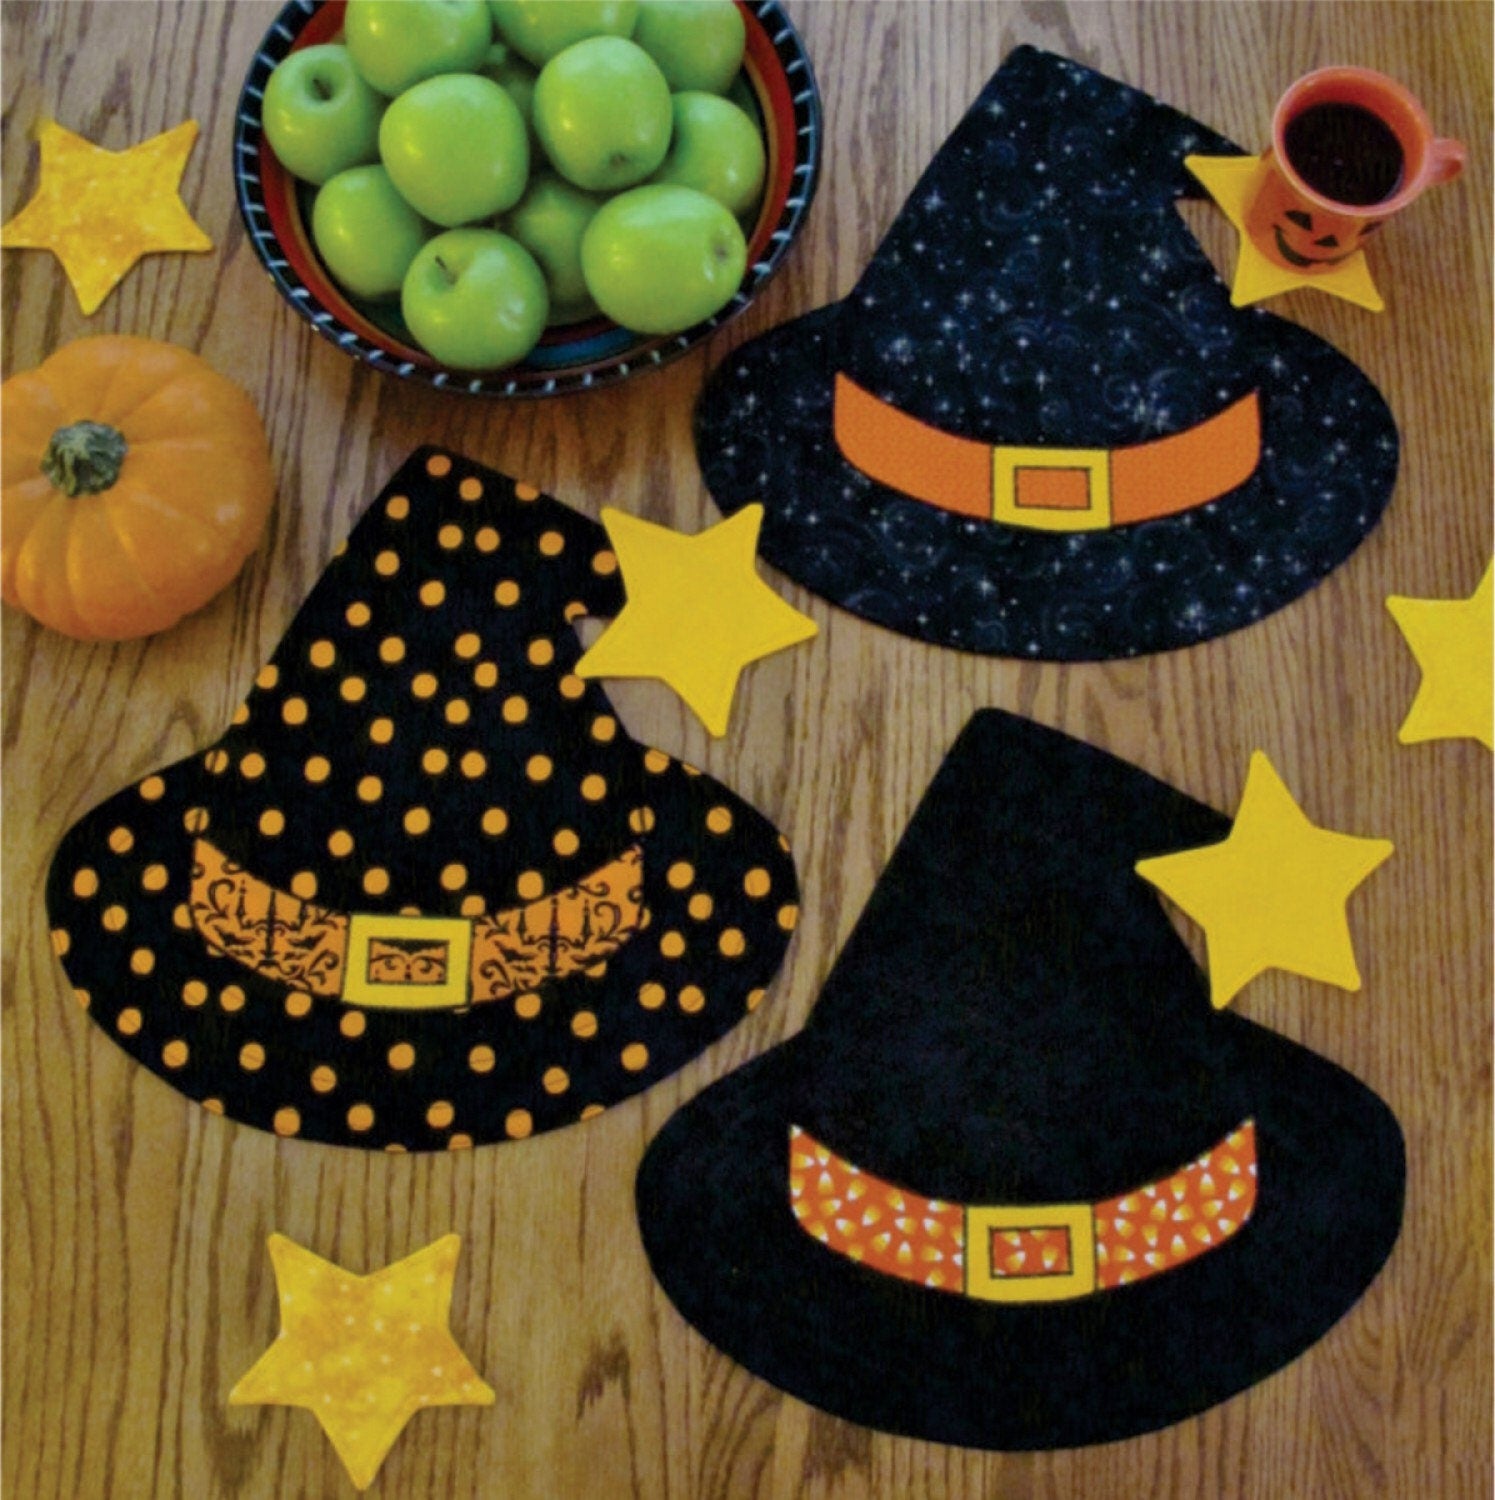 Winifred’s Party Placemat Pattern - Susie C Shore Designs - Suzanne Shore - Halloween Placemat Pattern